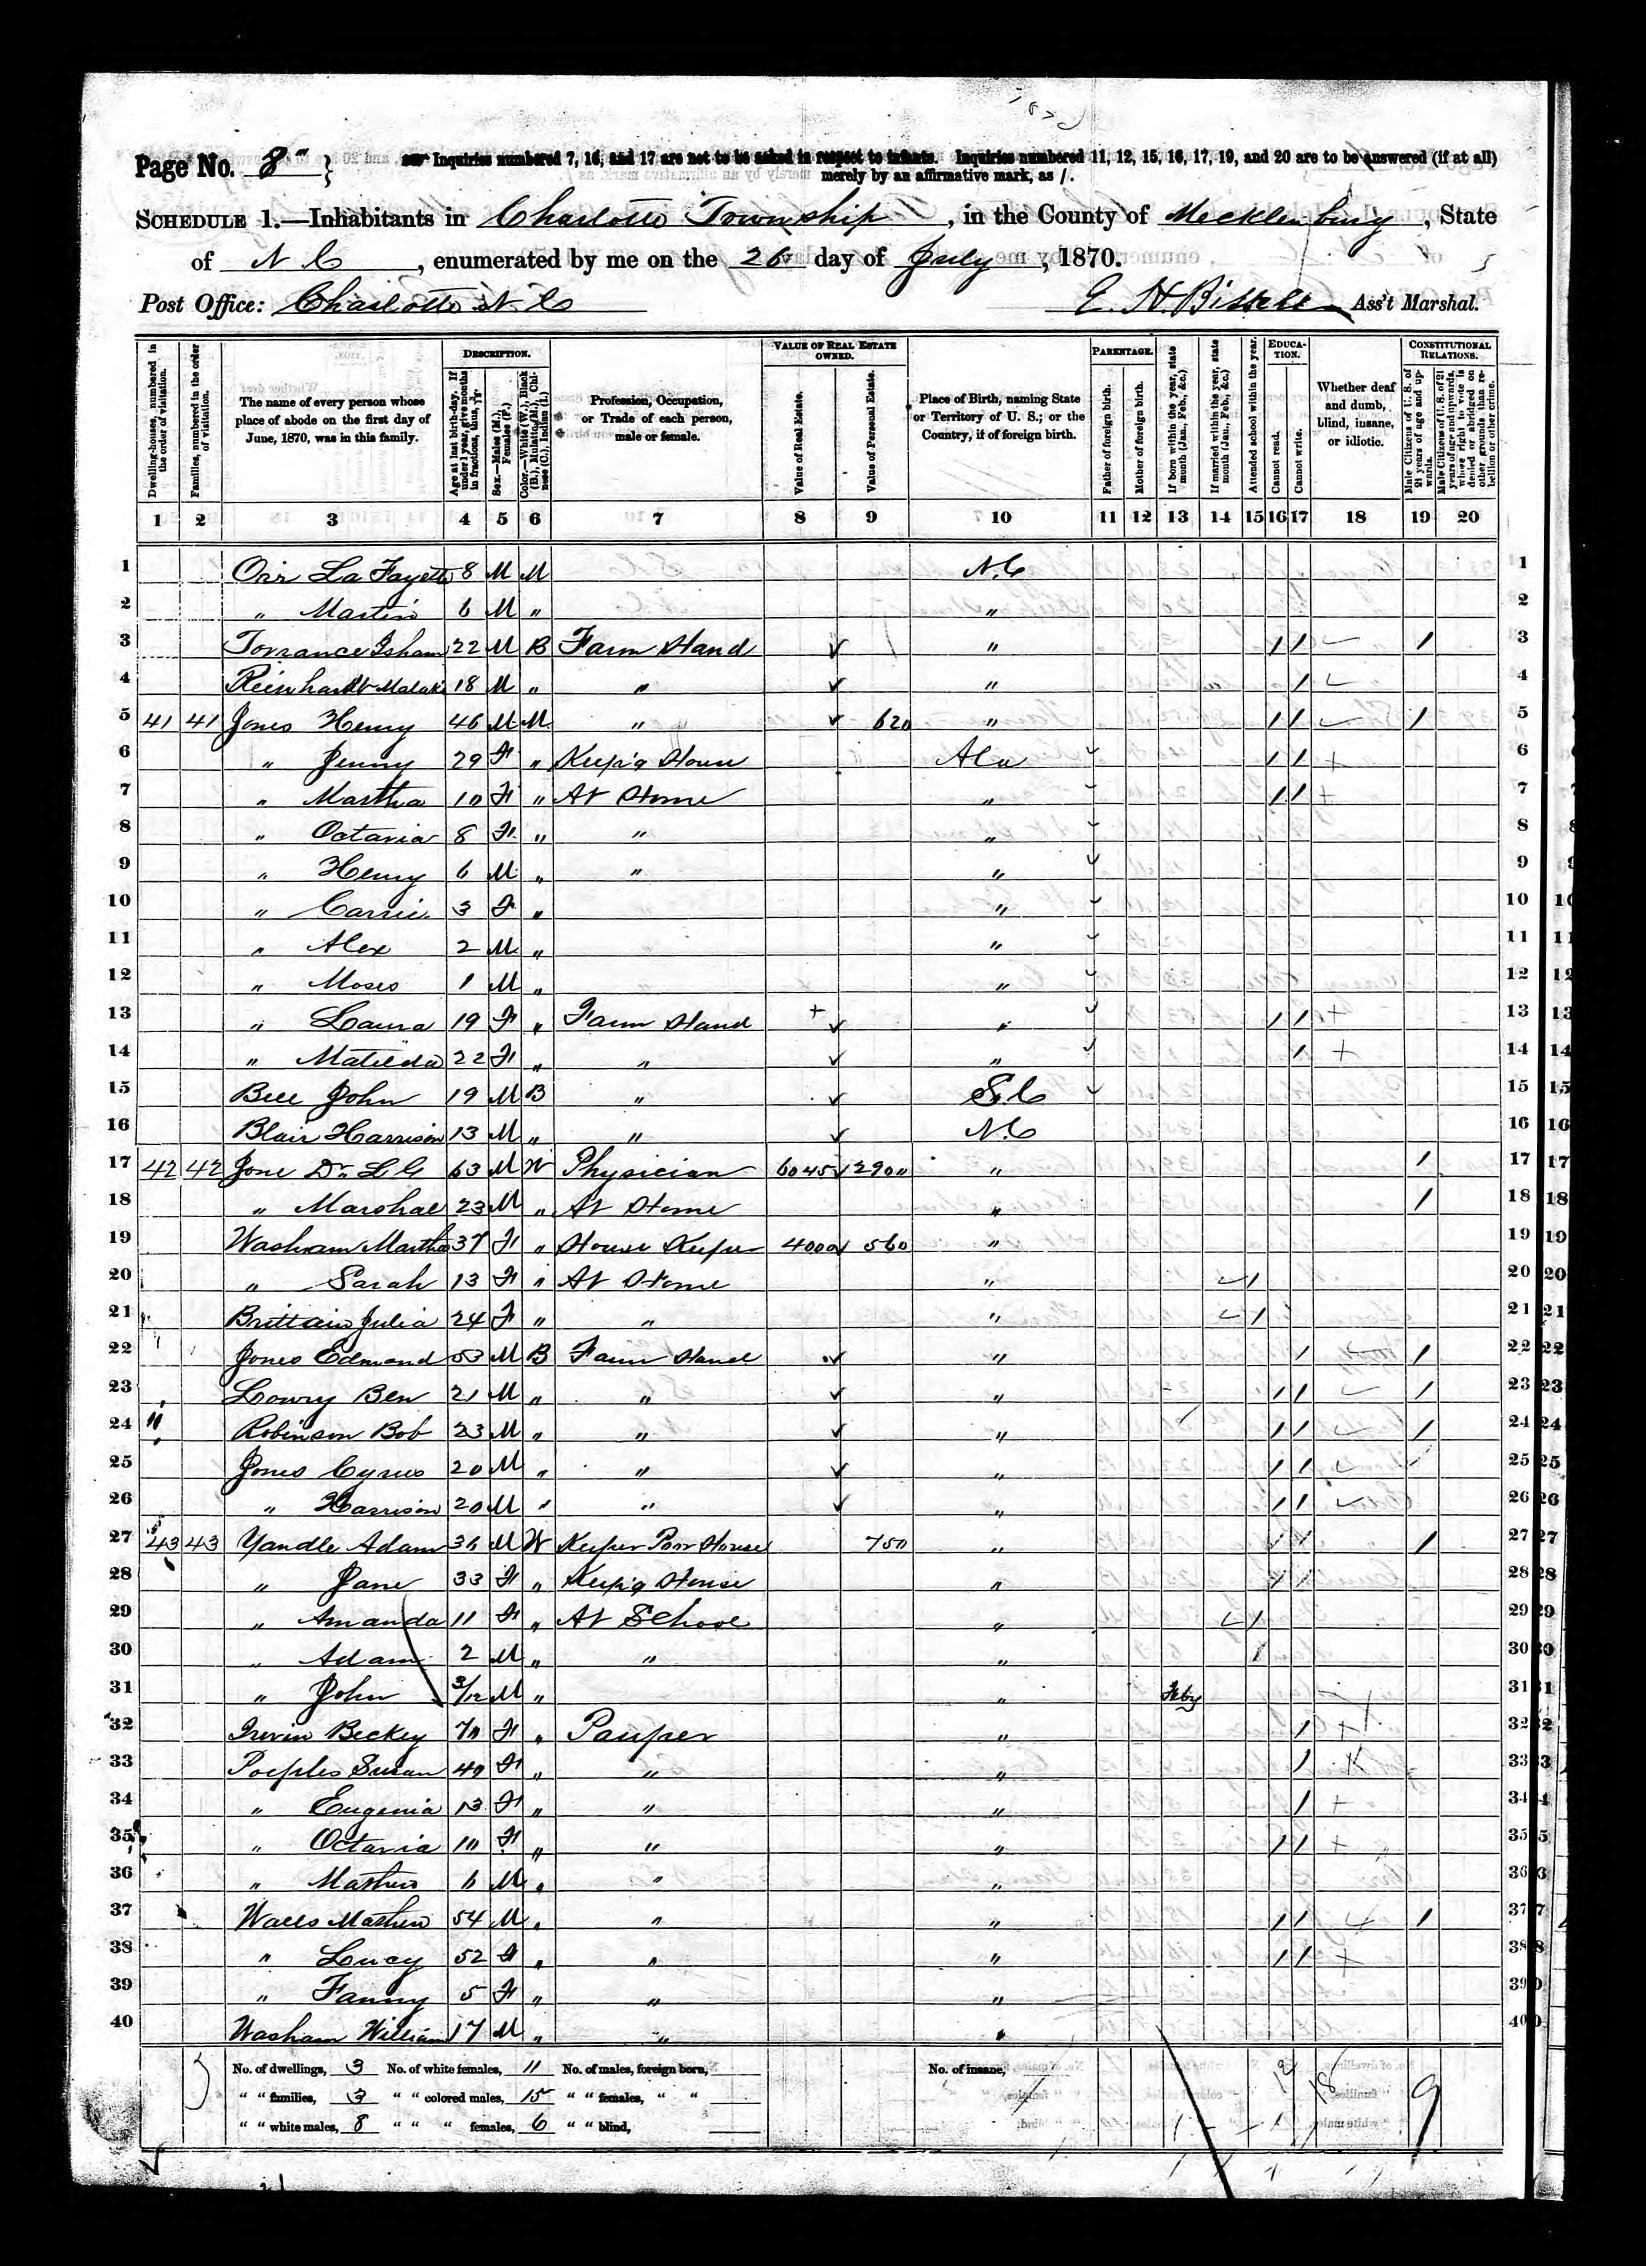 1870 Census, showing Poor House in Mecklenburg County